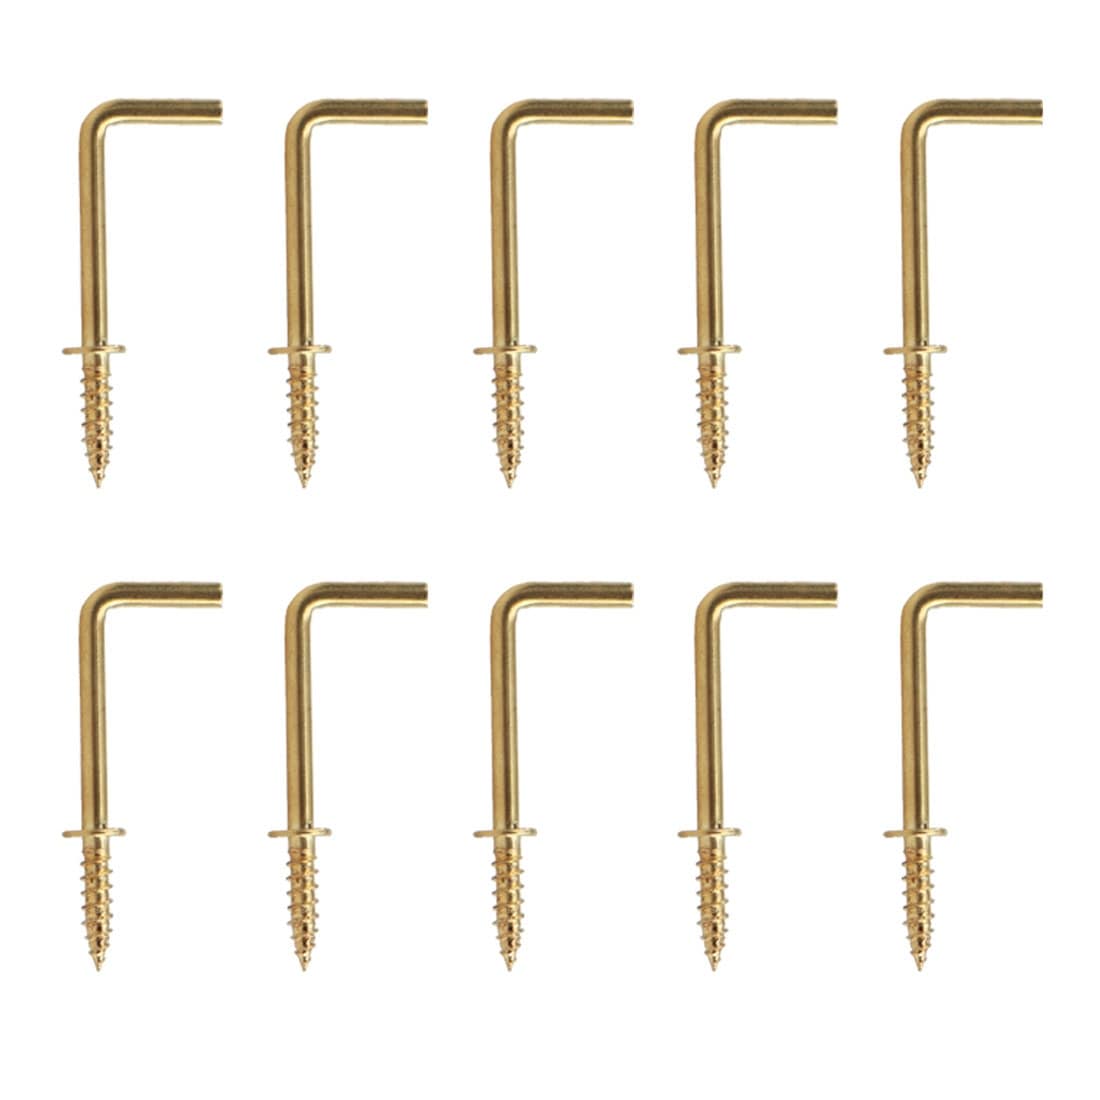 10X Ceiling Wall Hooks Cup Hook Holder 2 inch Mounted Screw In Hook Multi Use